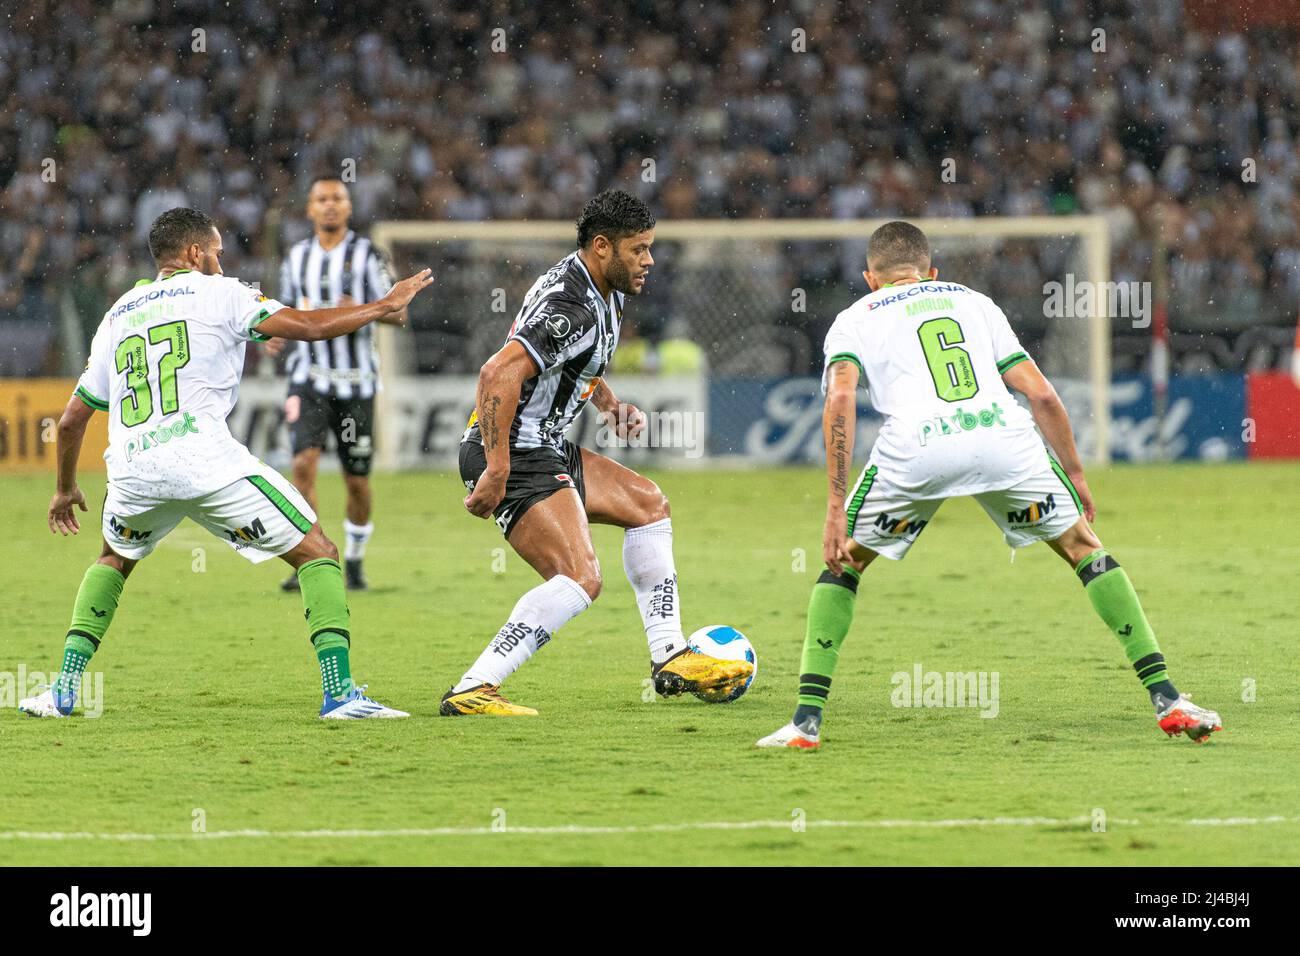 Belo Horizonte, Brazil. 13th Apr, 2022. MG - Belo Horizonte - 04/13/2022 - LIBERTADORES 2022 ATLETICO -MG X AMERICA-MG - Hulk player of Atletico-MG during a match against America-MG at Mineirao stadium for the Copa Libertadores 2022 championship. Photo: Alessandra Torres/AGIF Credit: AGIF/Alamy Live News Stock Photo